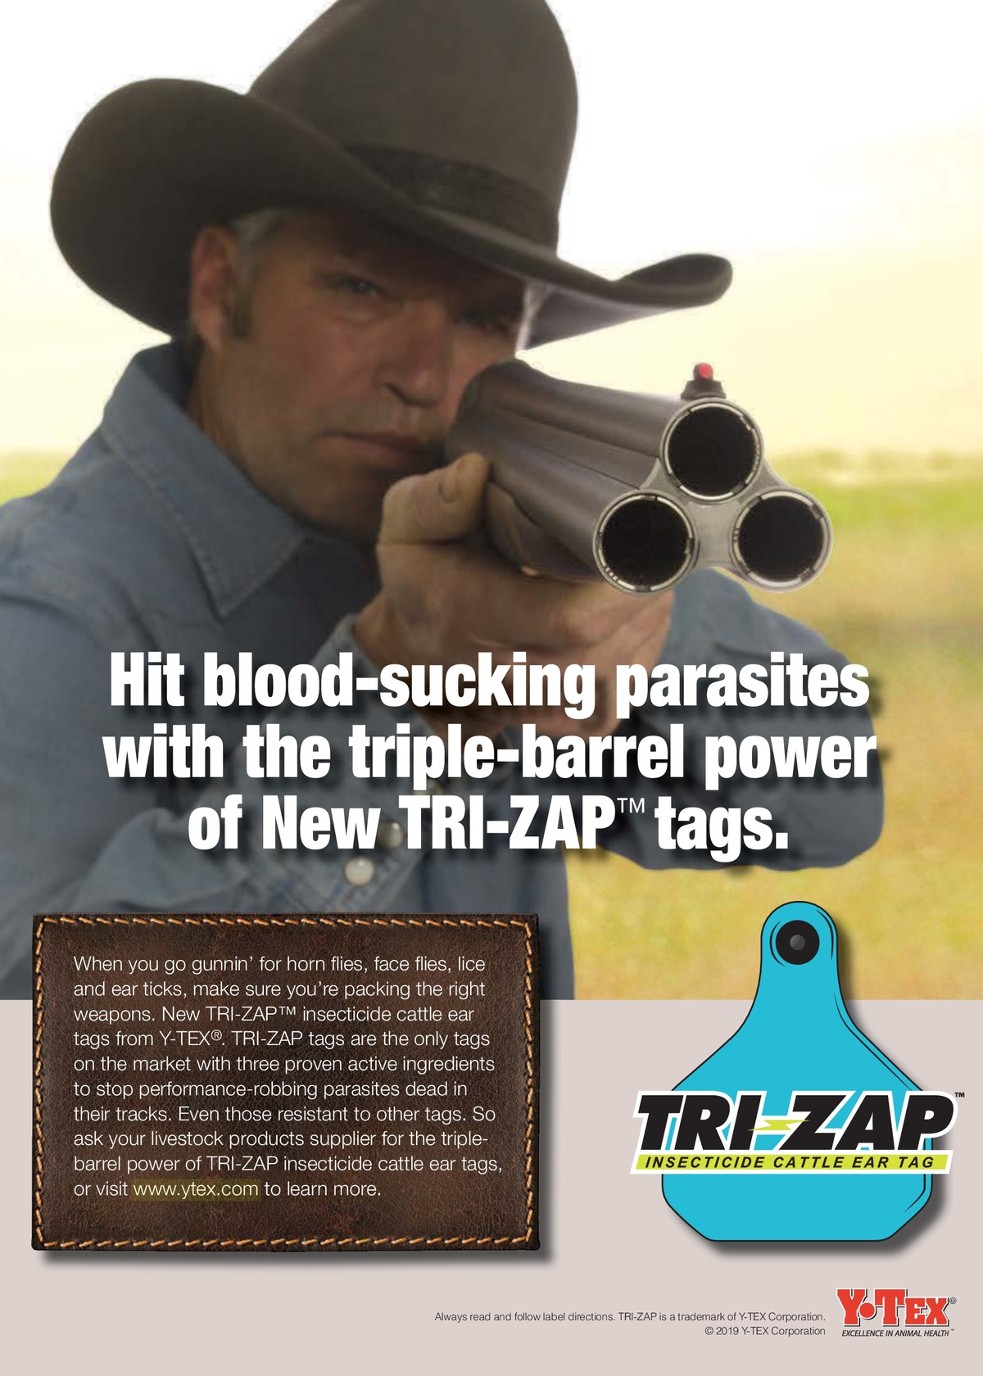 Tri-Zap Insecticide Cattle Ear Tags